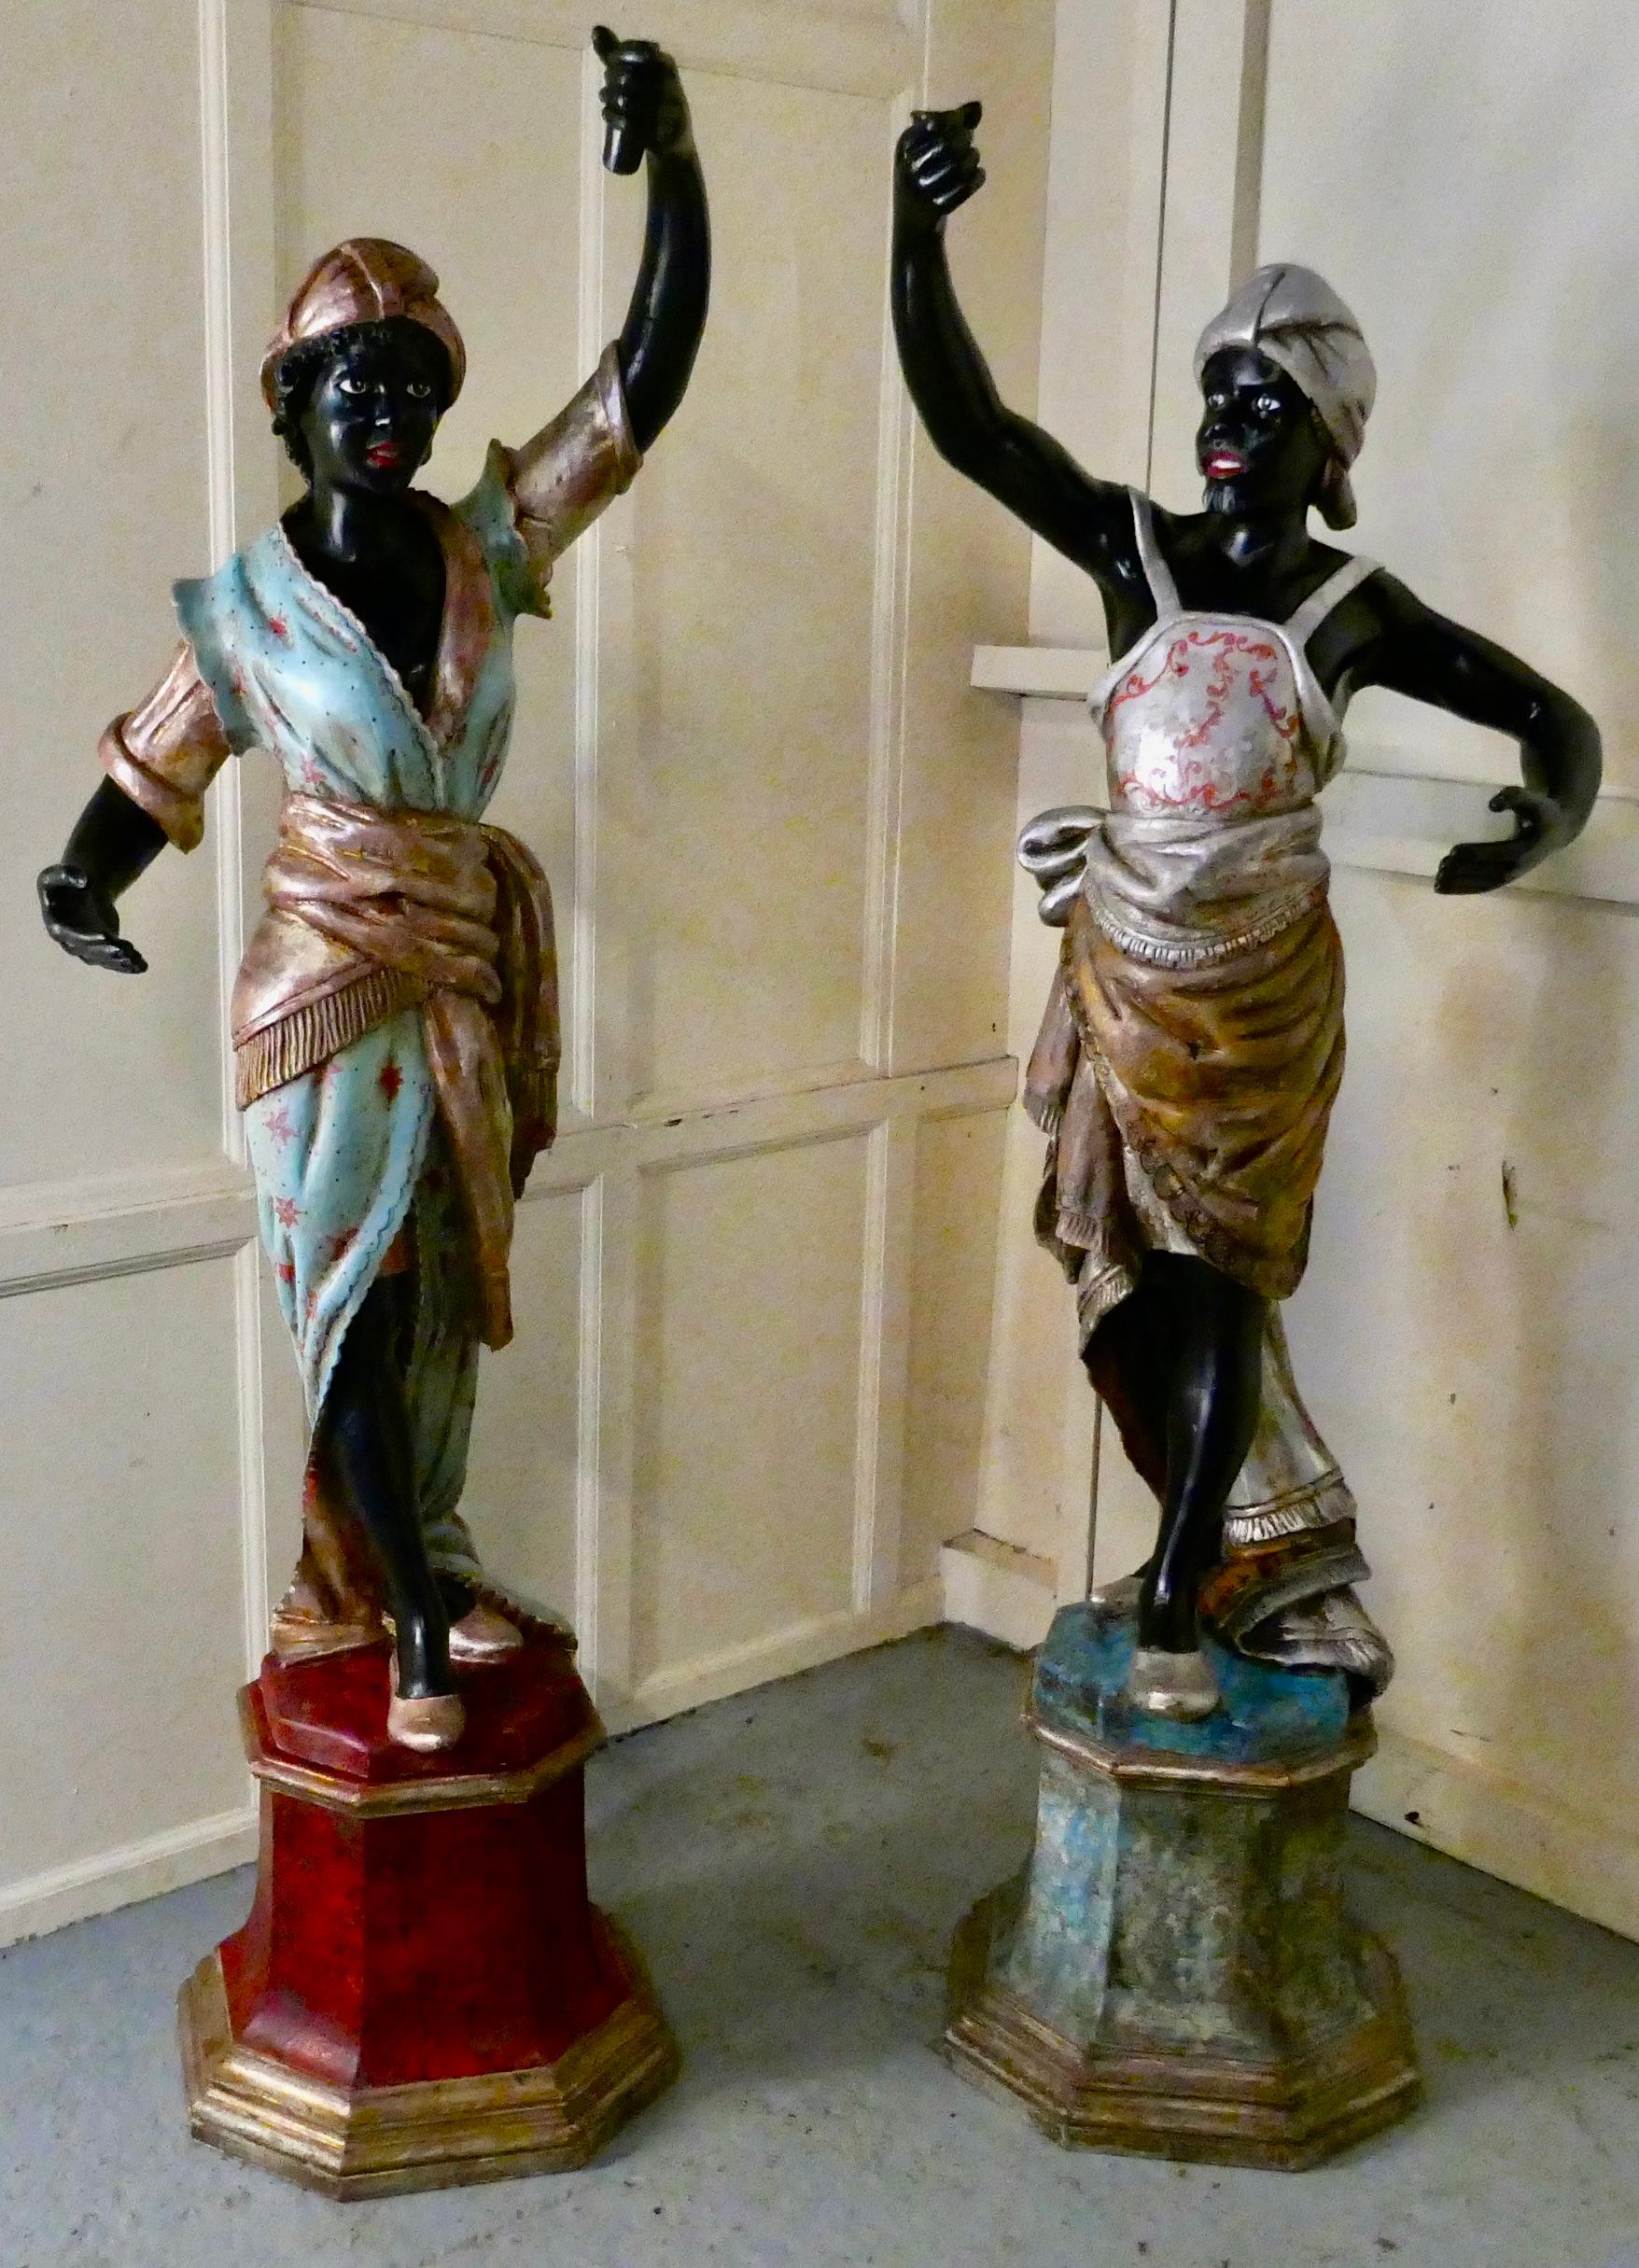 Pair of 19th century male and female Italian carved figures

This charming pair of figures stand almost 6ft high, they each have a socket in their hand which once would have held a candle sconce.
They are extravagantly dressed, him with his neat